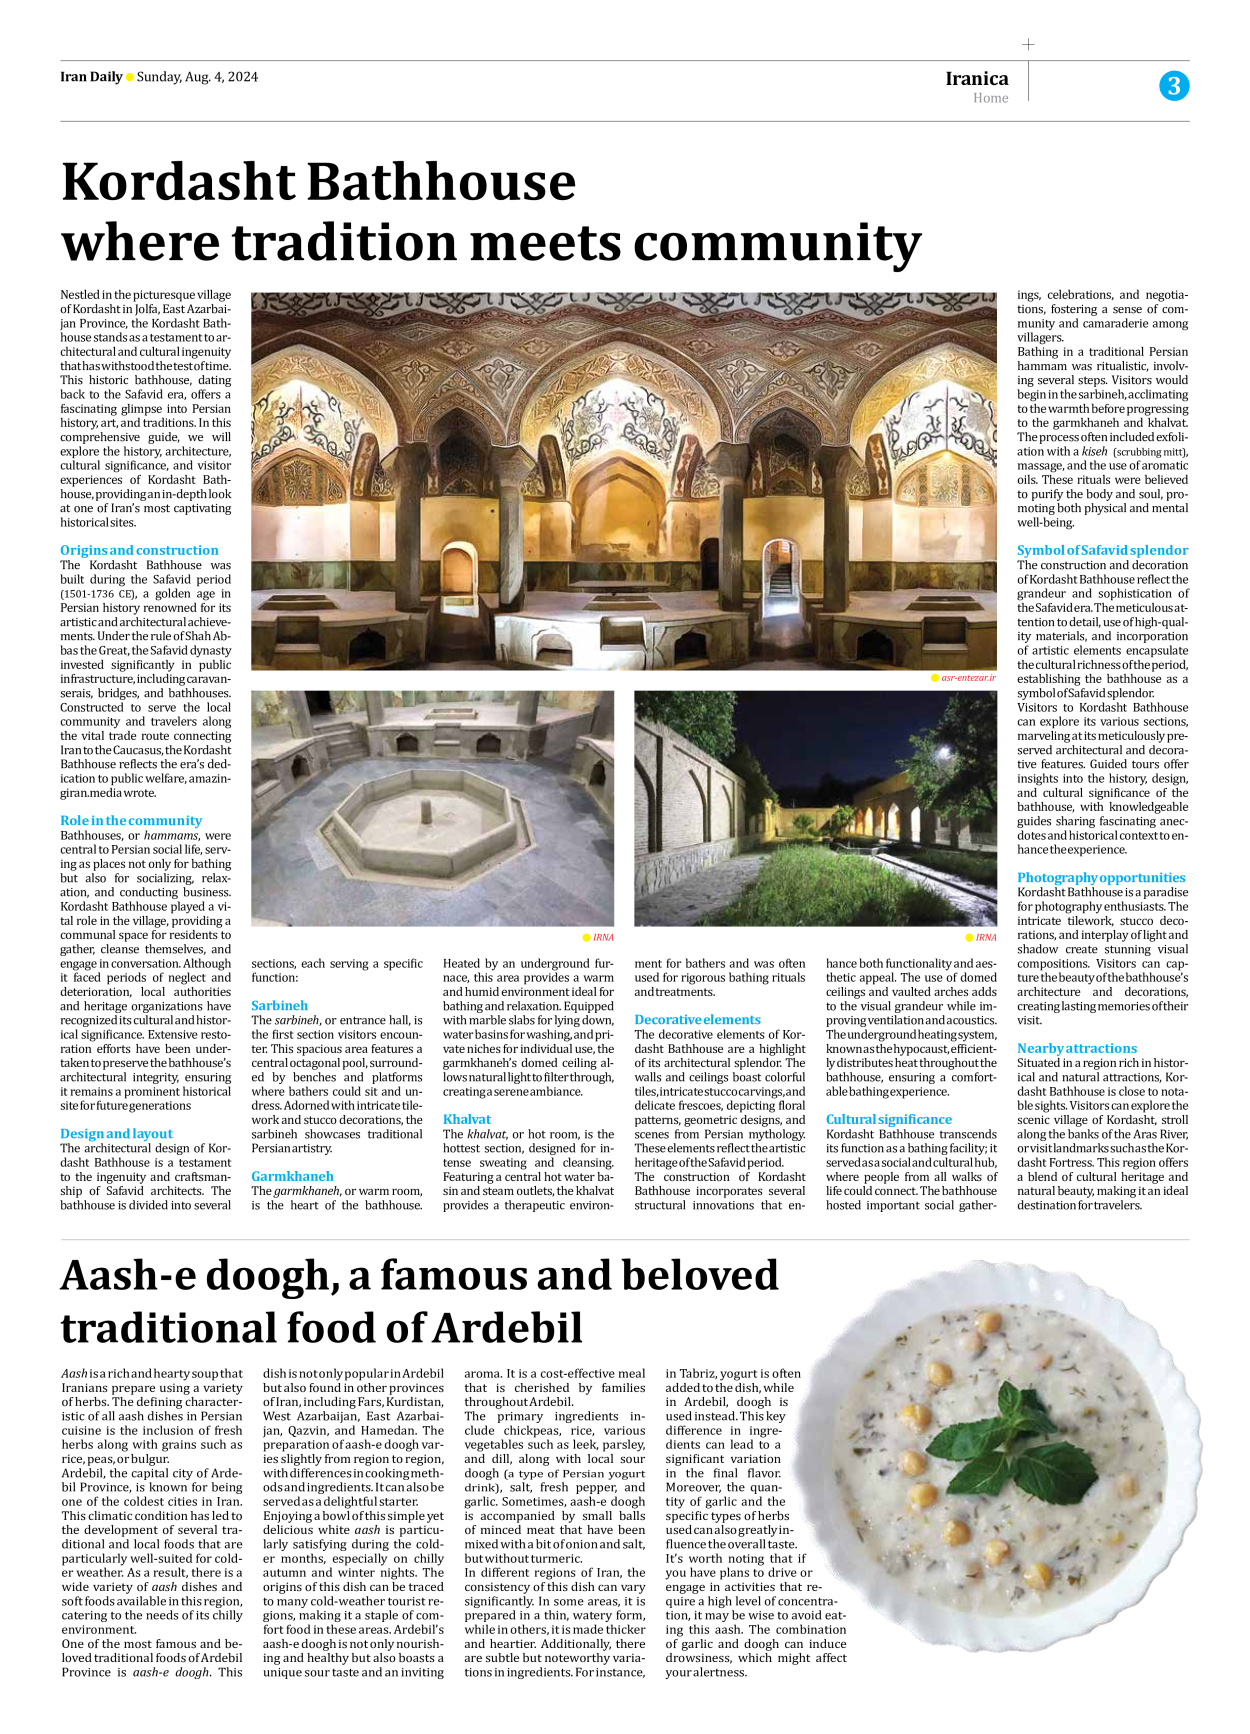 Iran Daily - Number Seven Thousand Six Hundred and Nineteen - 04 August 2024 - Page 3